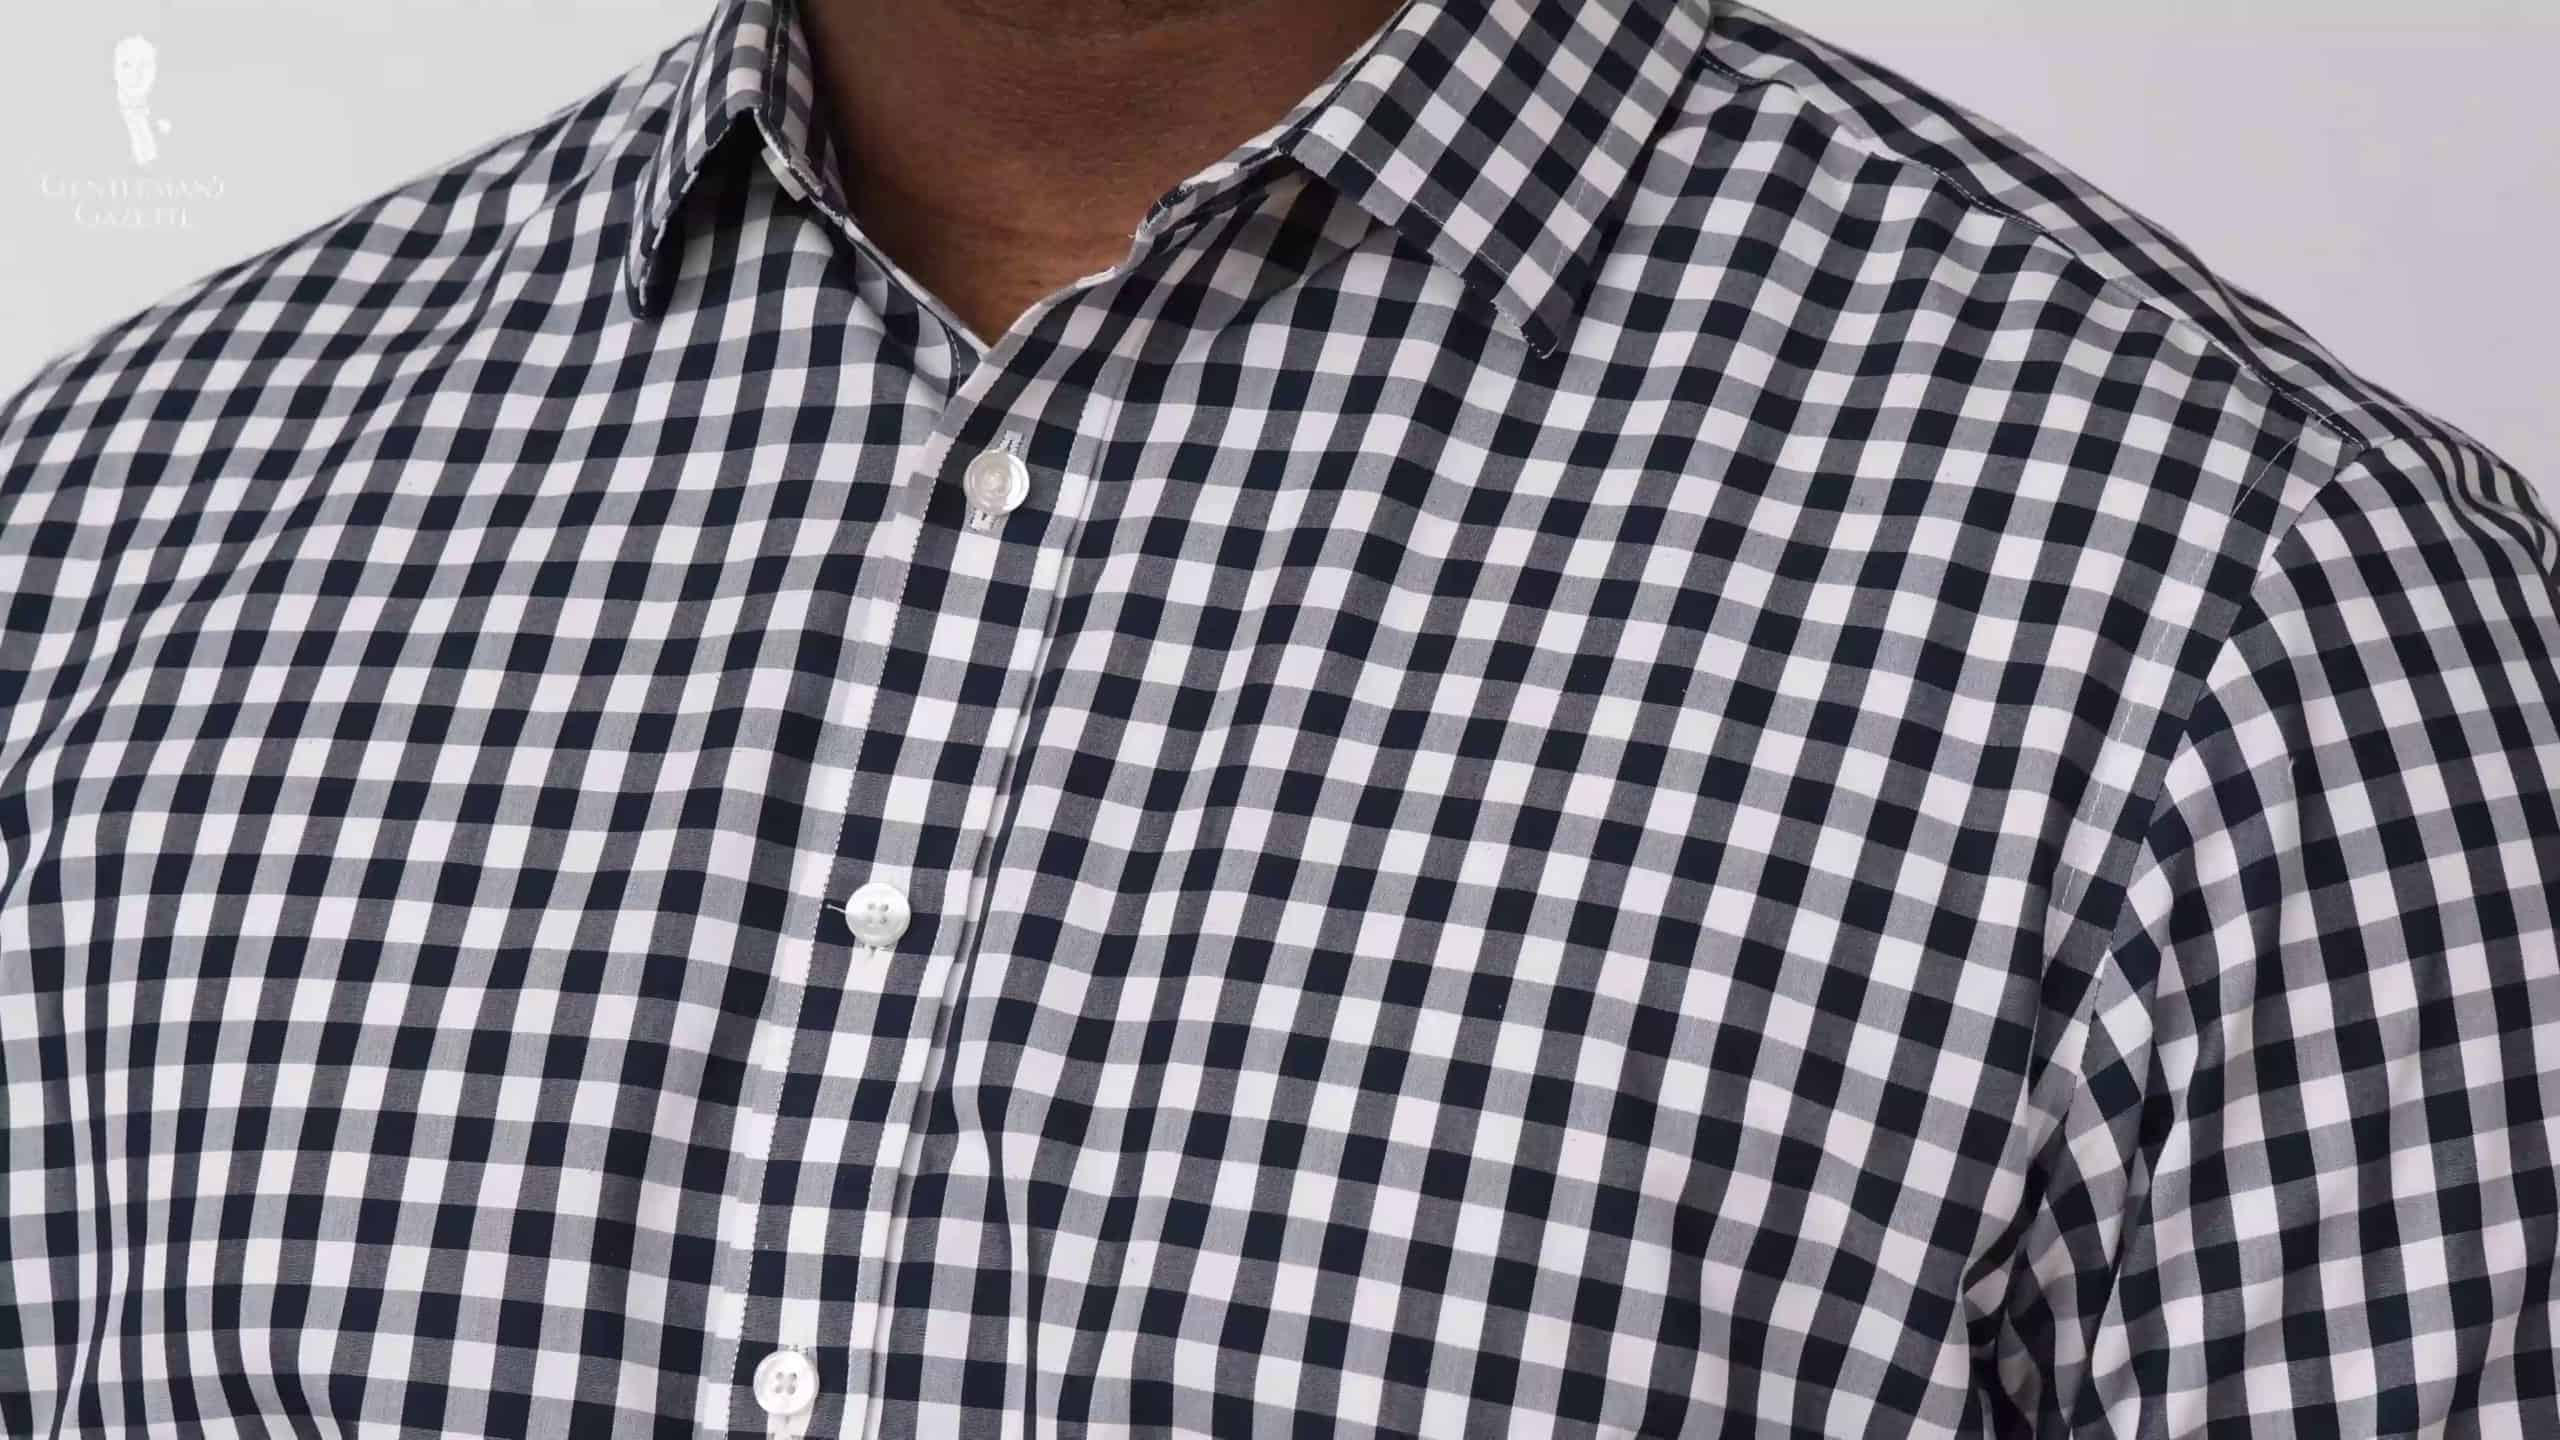 A dress shirt with a replaced button.